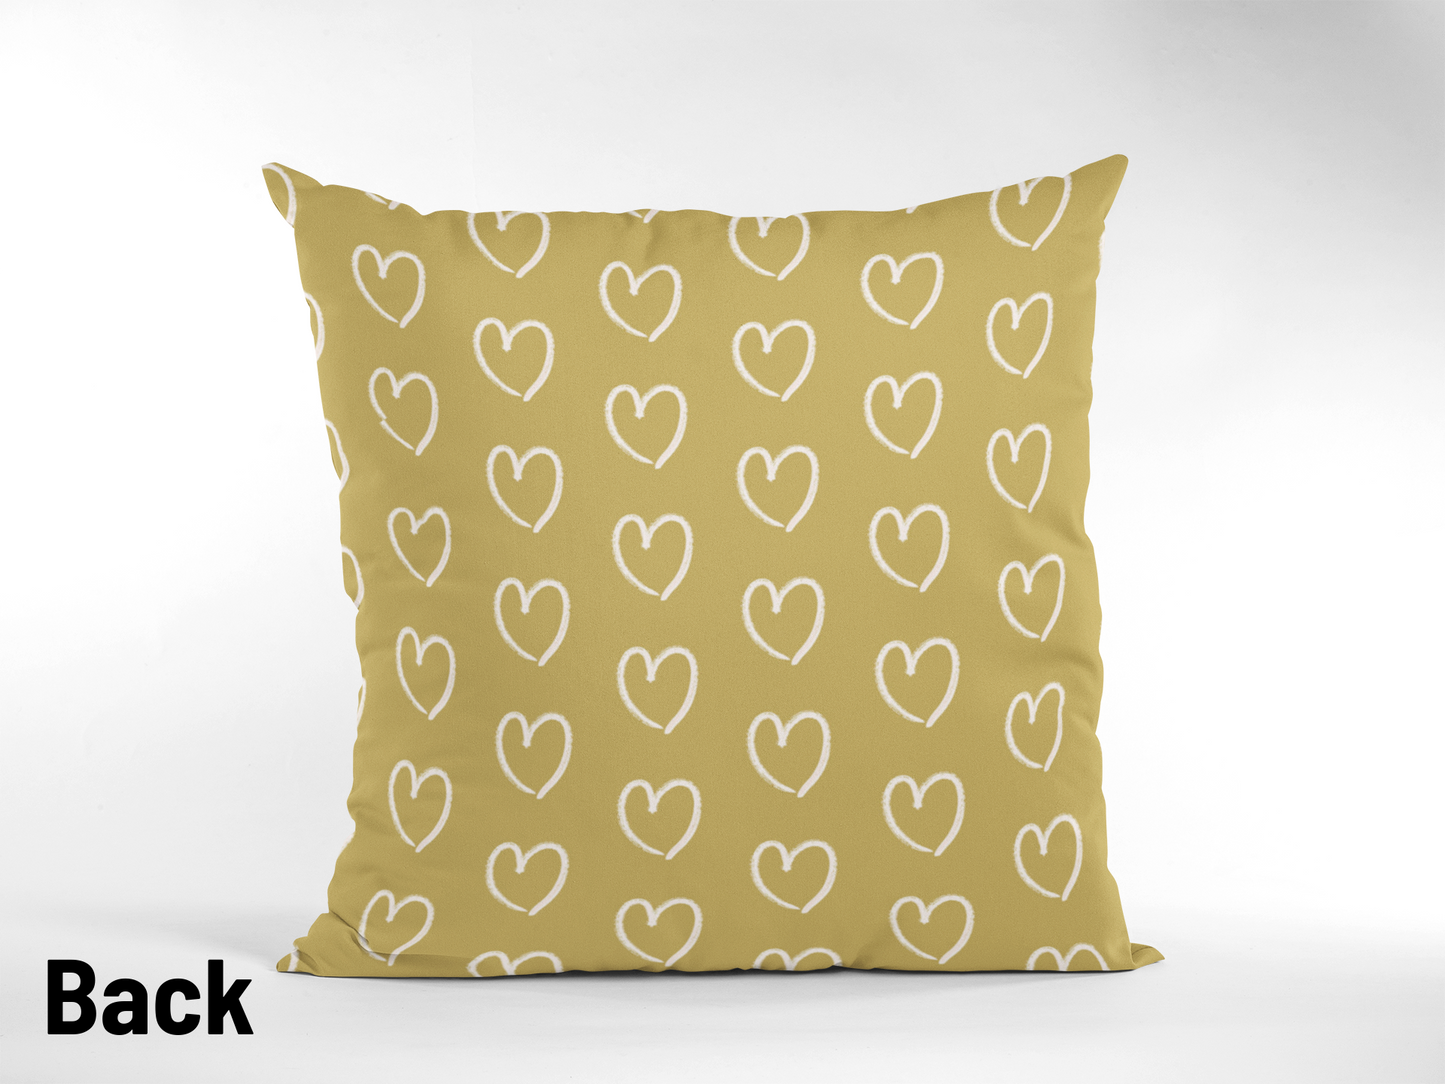 Gold and Hearts Decorative Pillow Cover